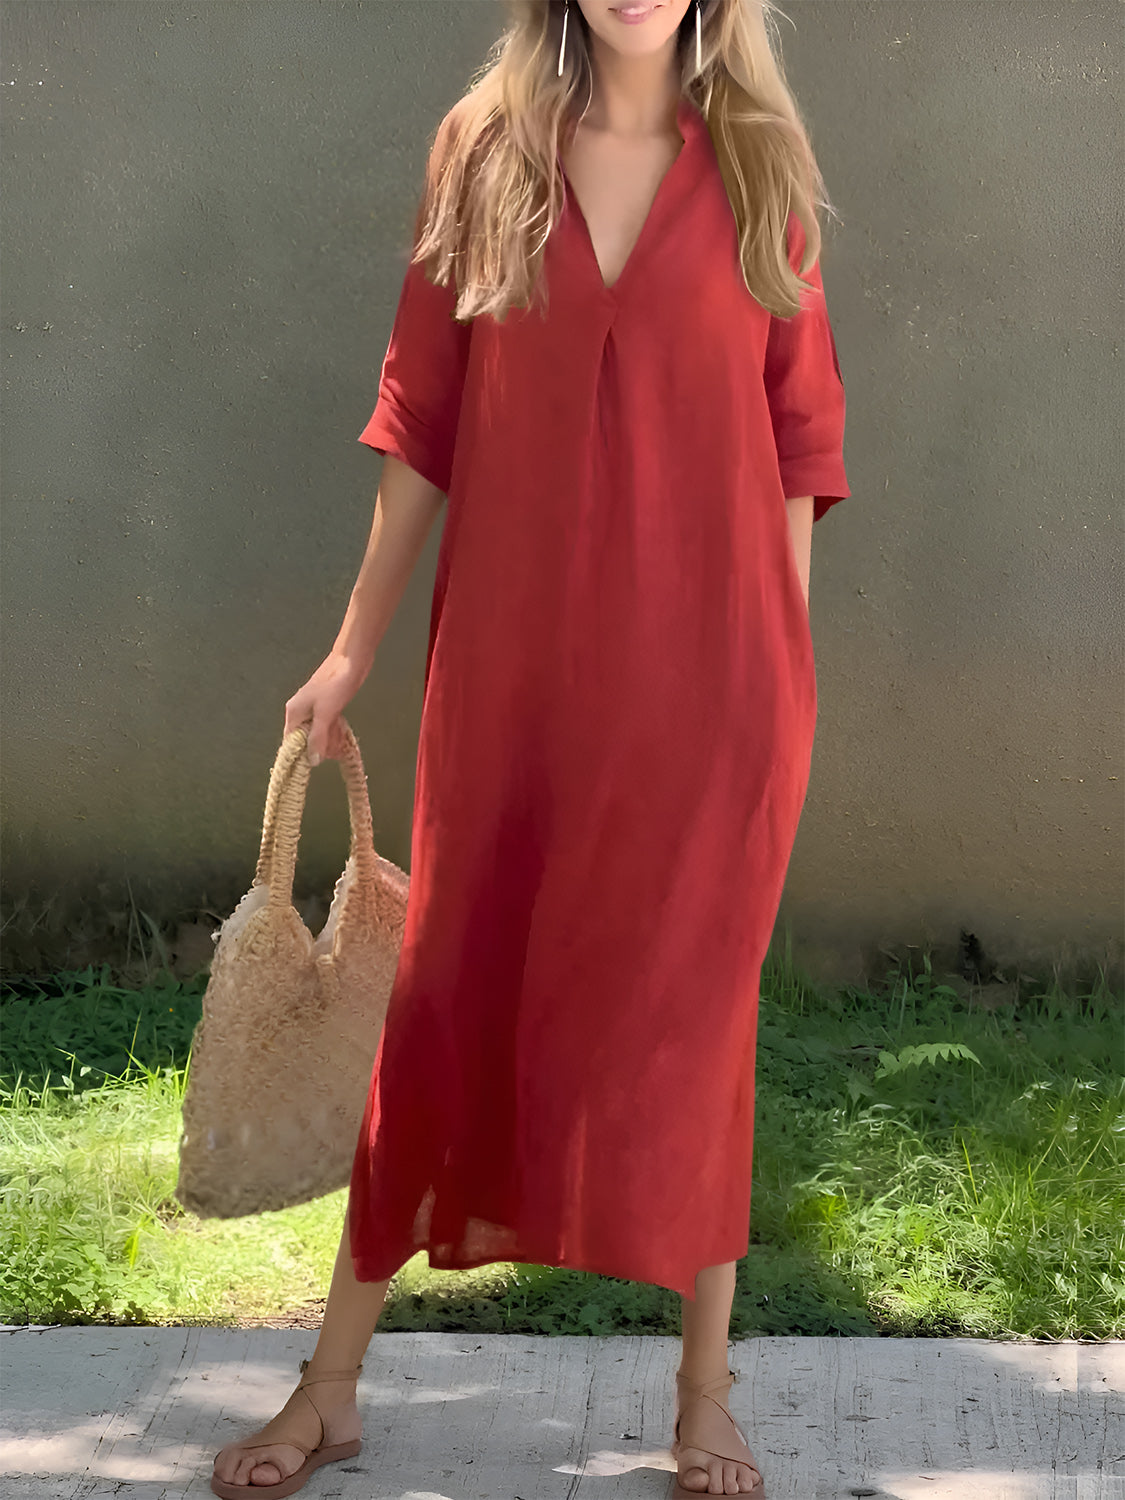 Comfortable and elegant red maxi dress with a V-neckline.